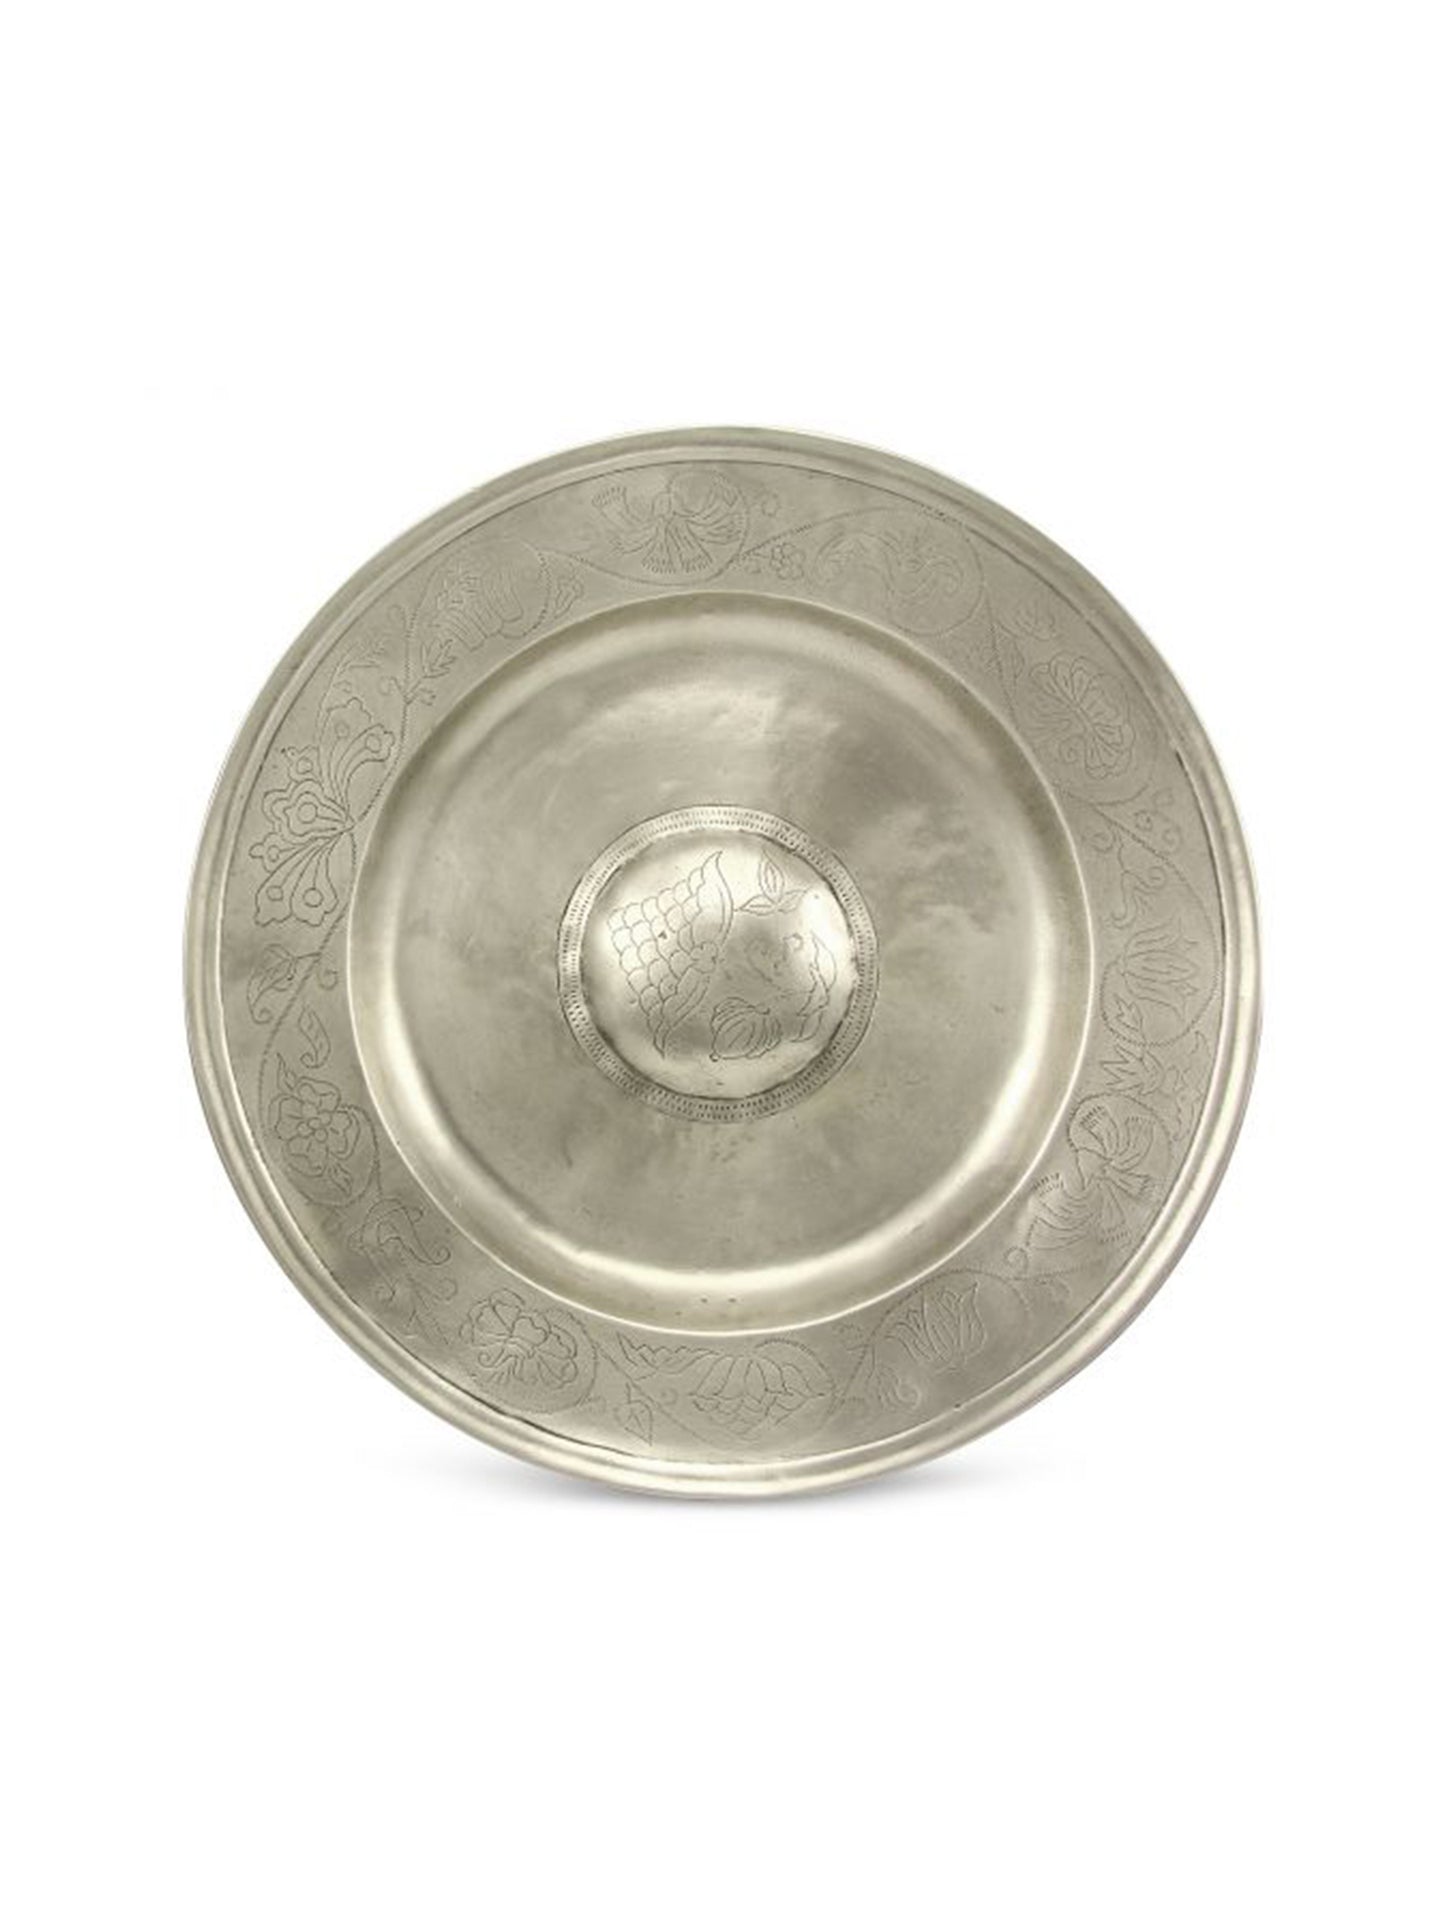 MATCH Pewter Engraved Deep Plate Weston Table